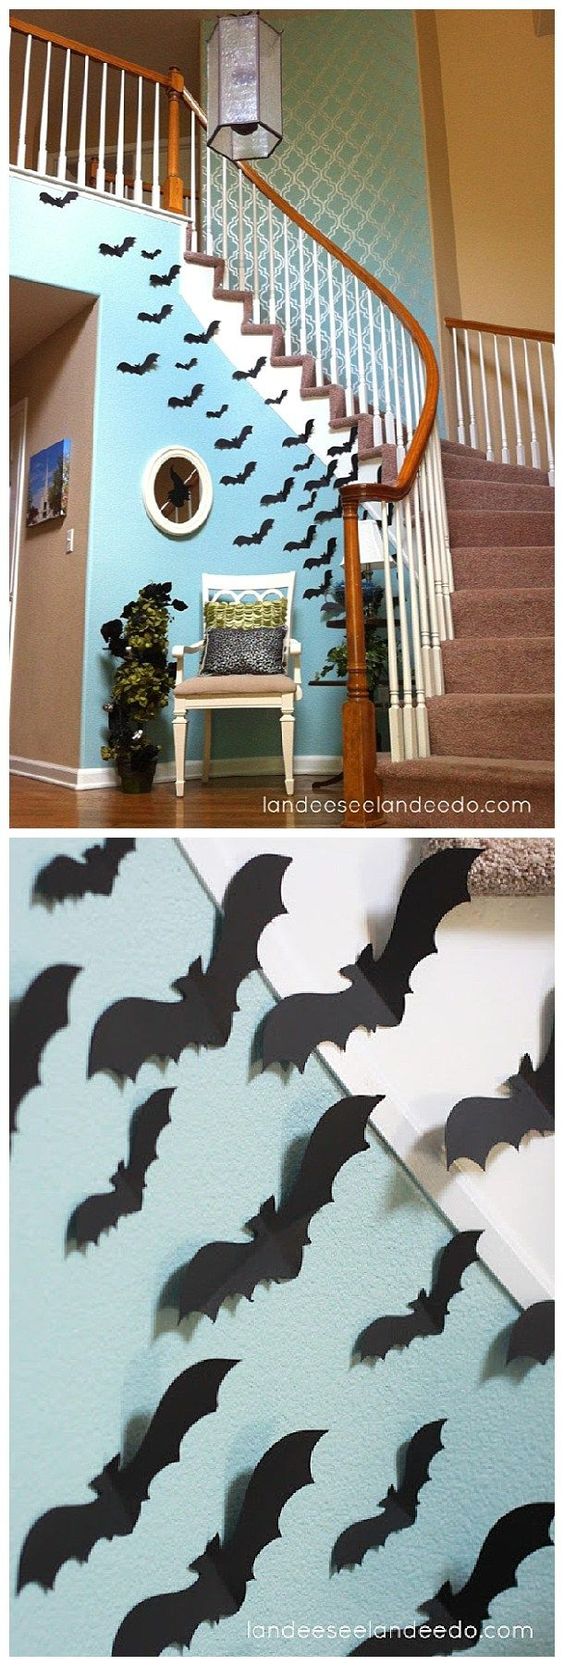 Bats are easy and fun way to decorate for Halloween.